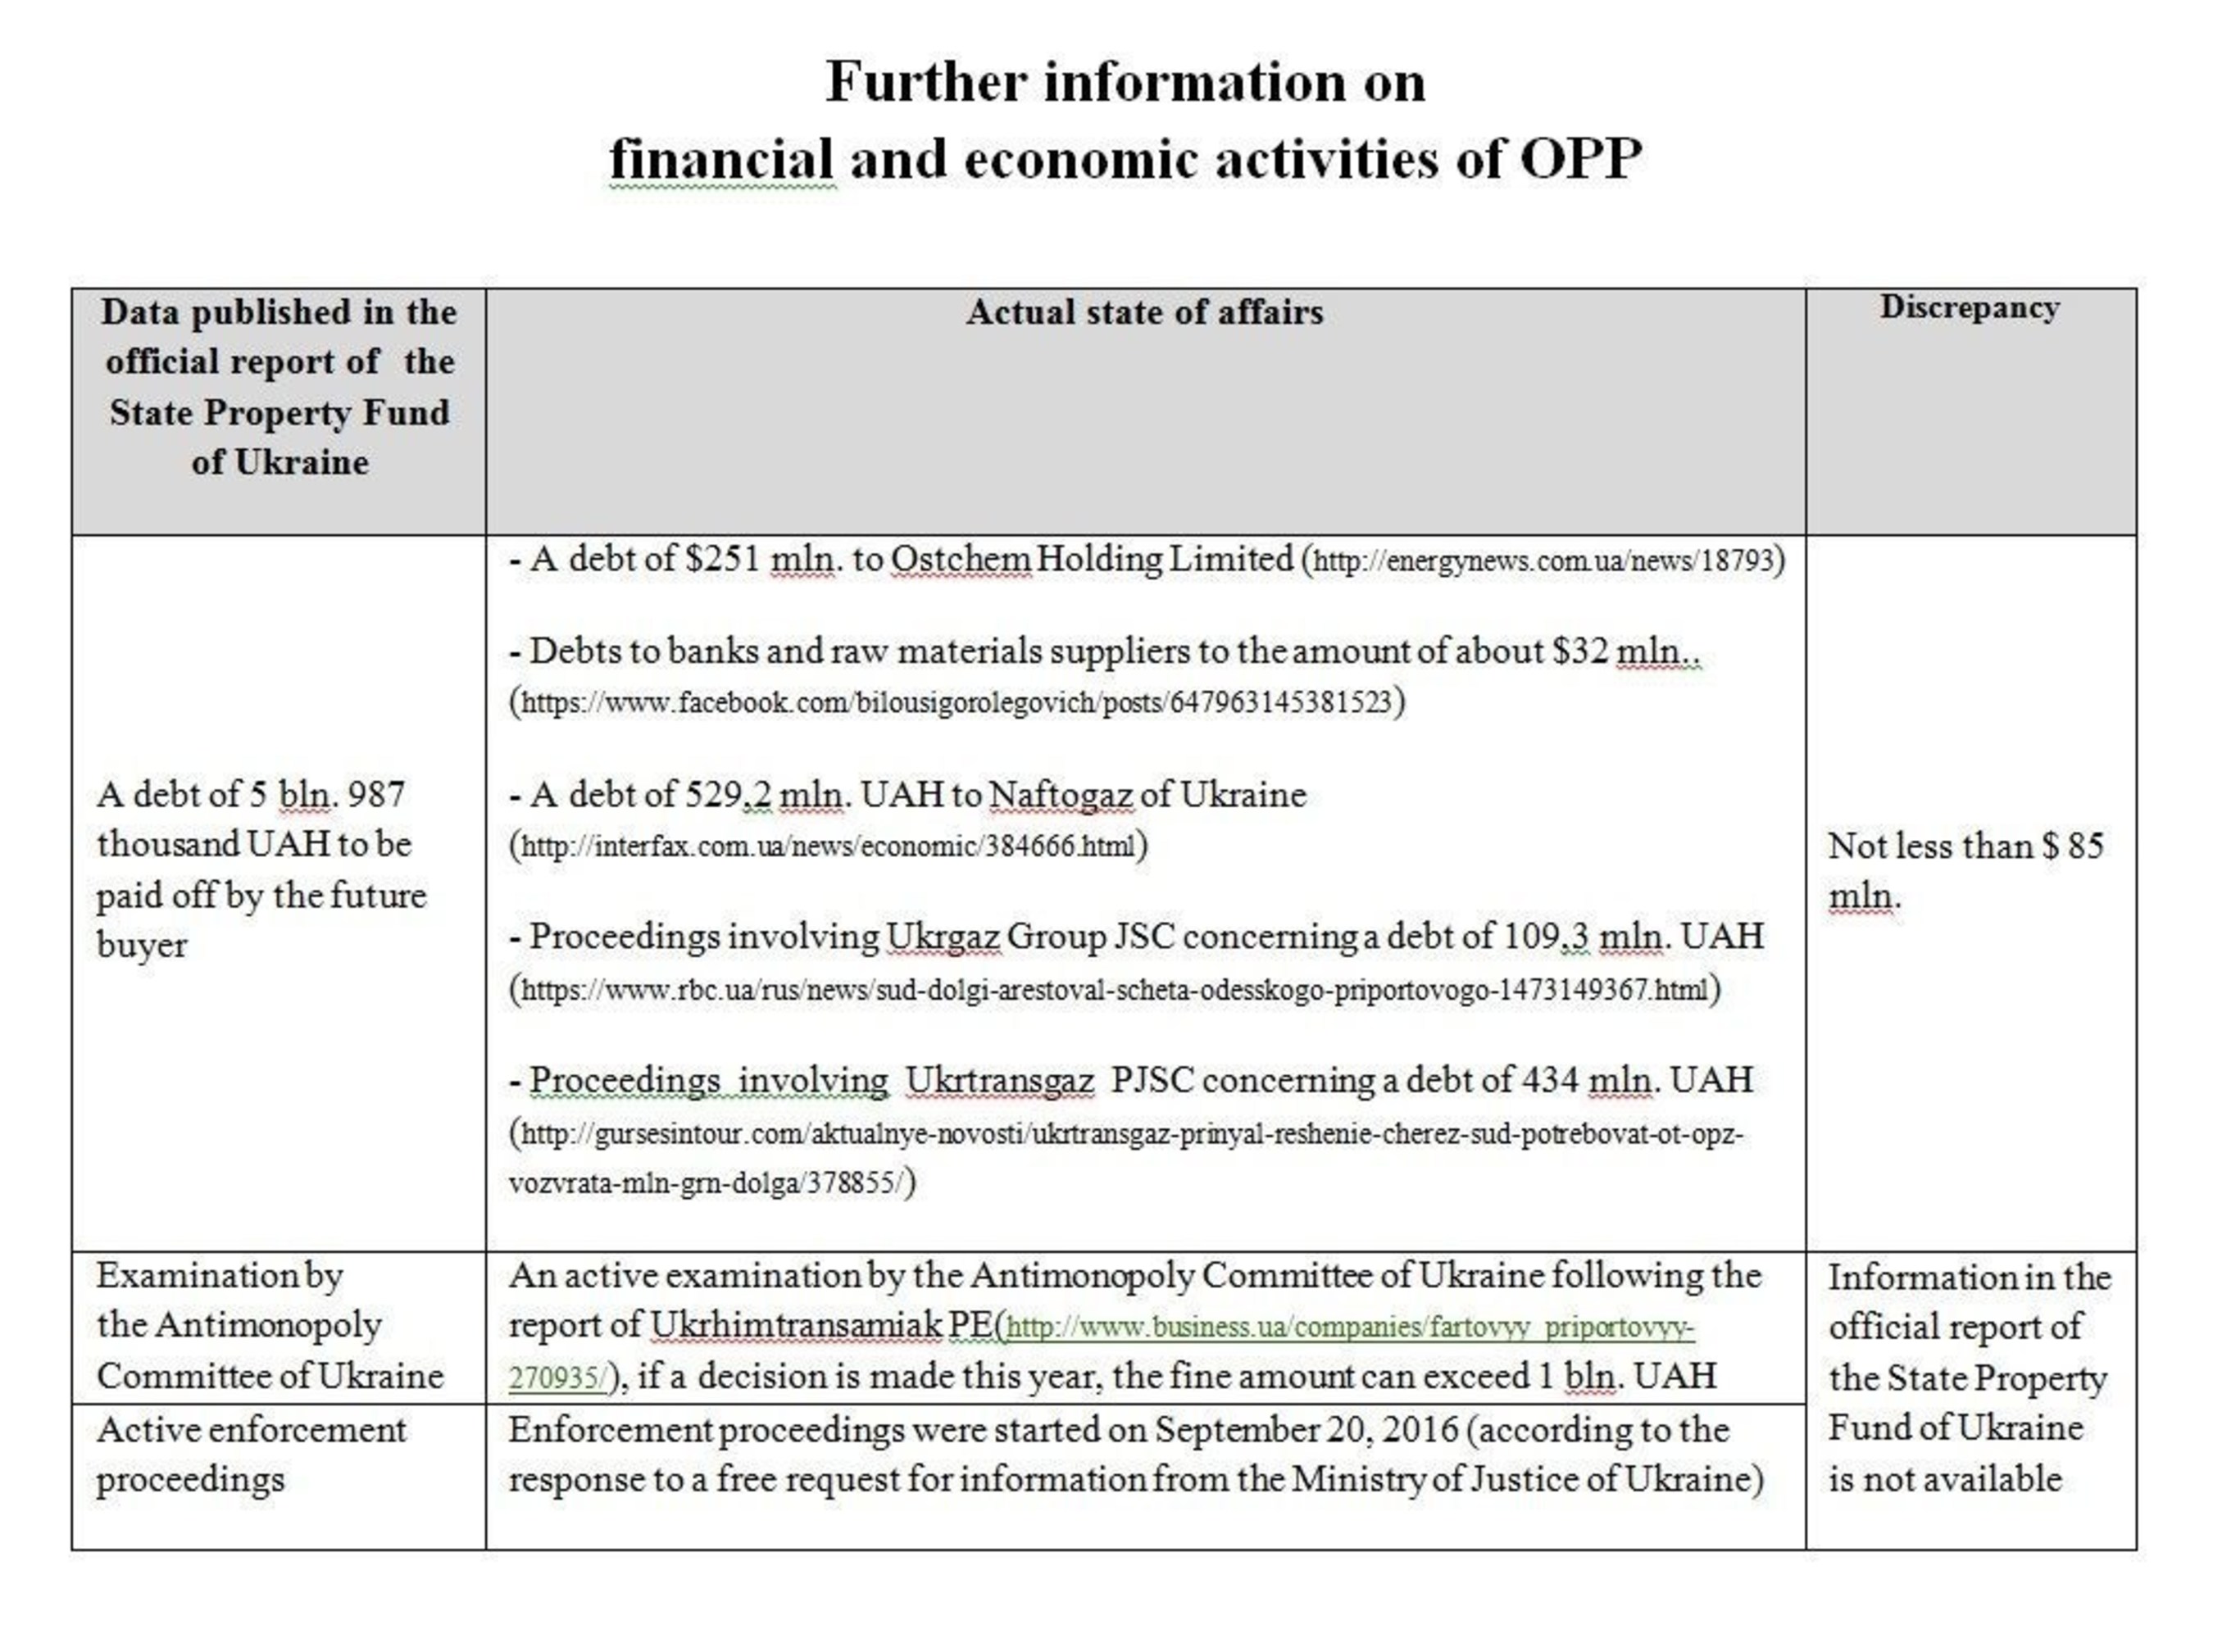 Further information on financial and economic activities of OPP